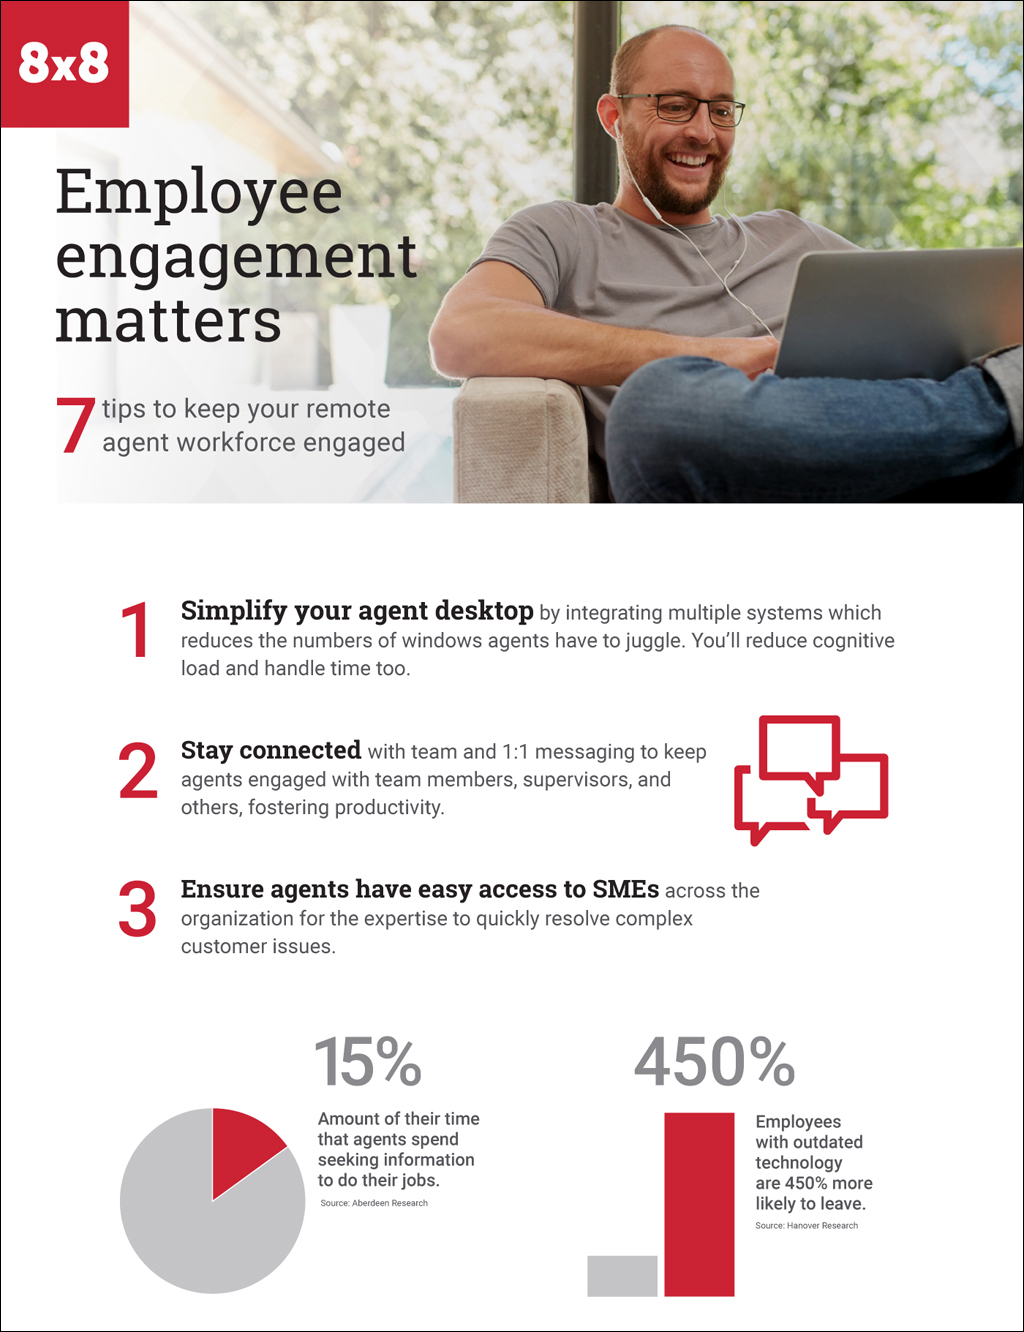 Online infographic discussing employee work engagement statistics